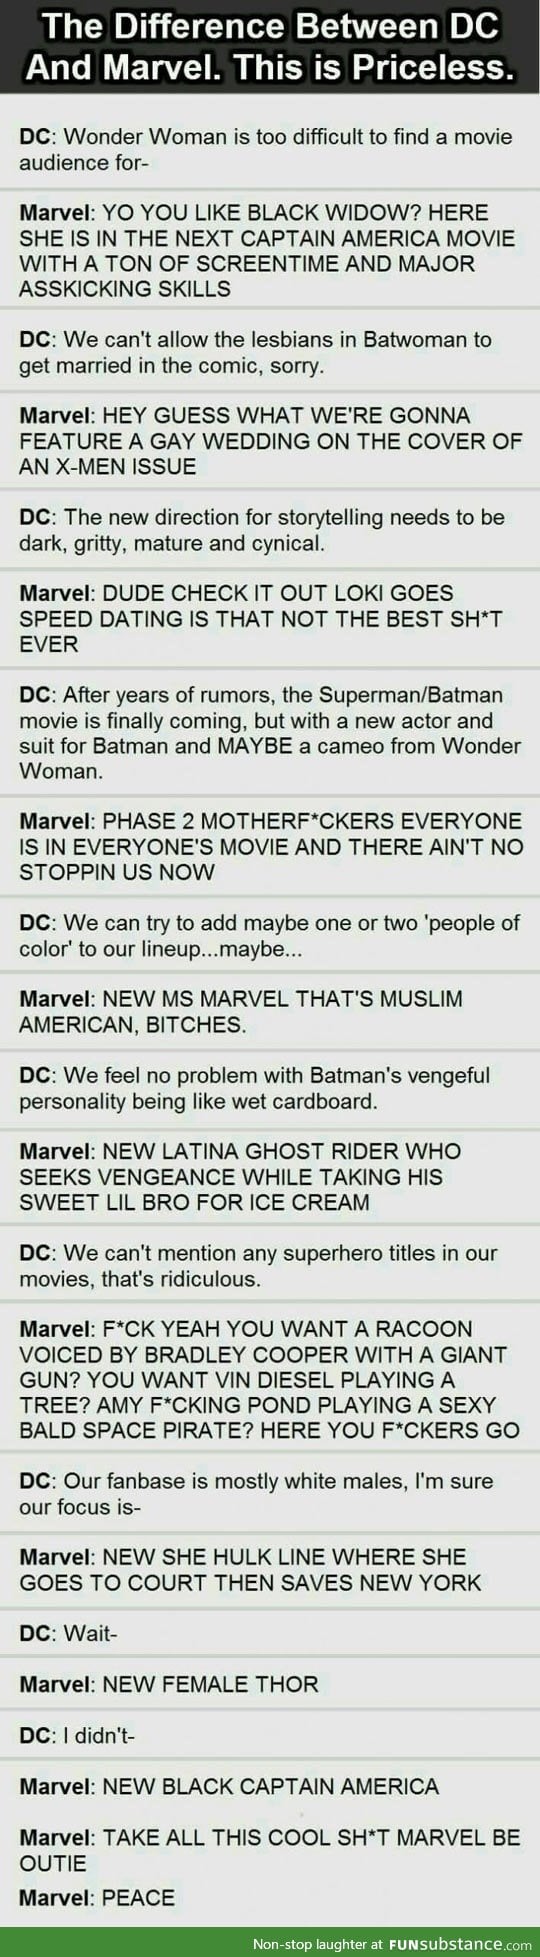 DC vs Marvel - yes, I know there are a few issues but it's still funny